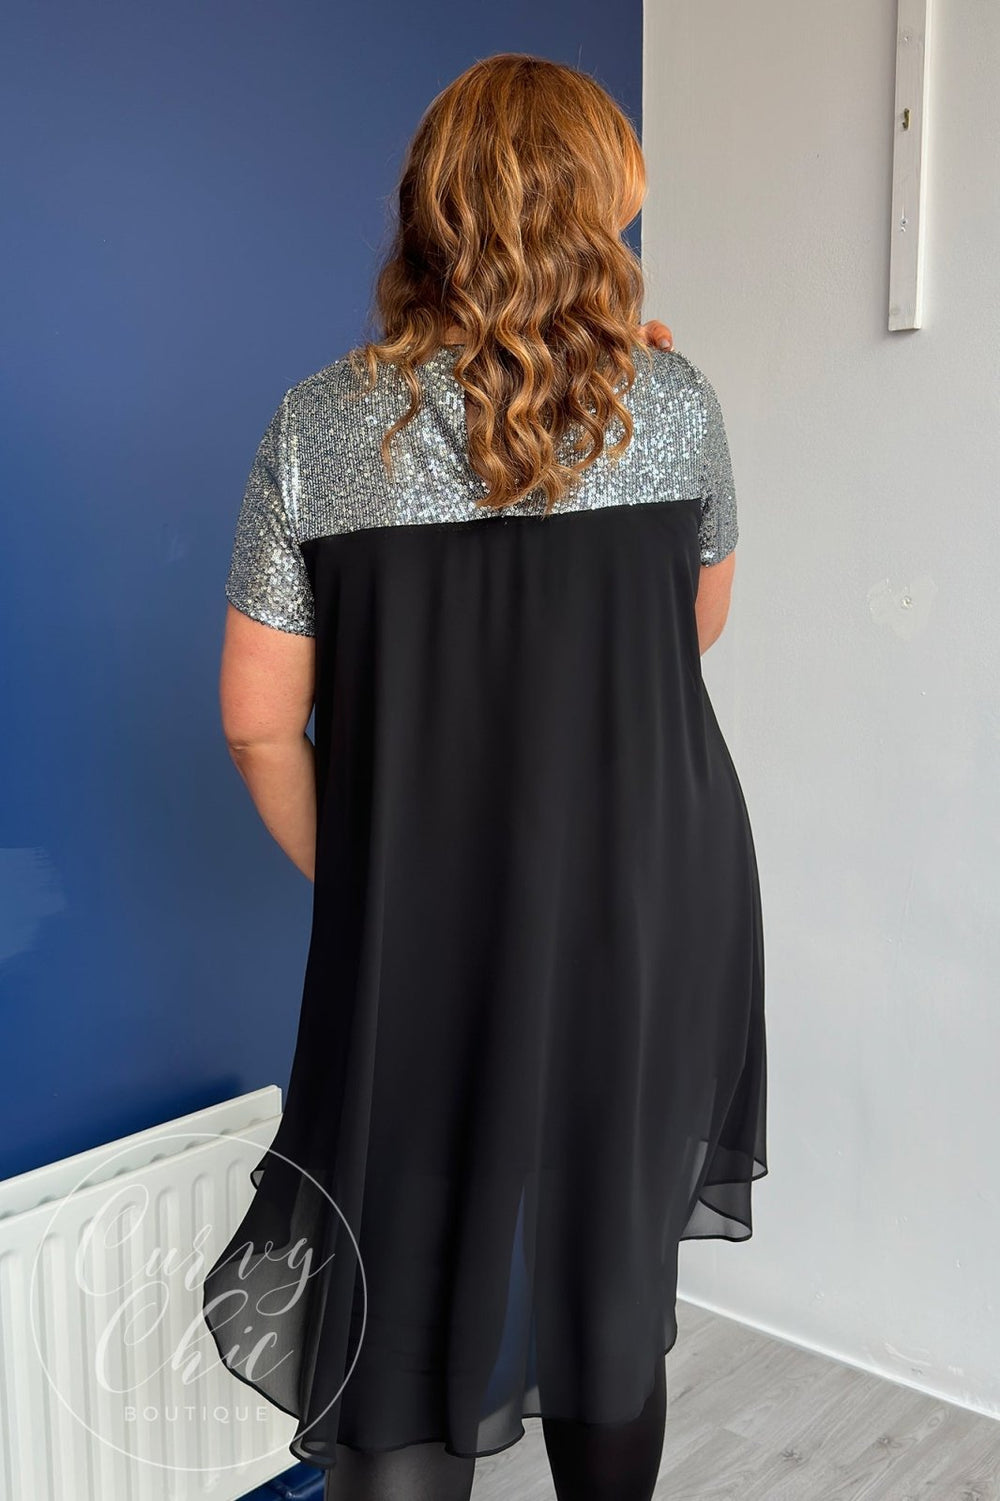 Black Wrap Plus Size Peplum Top with sleeves